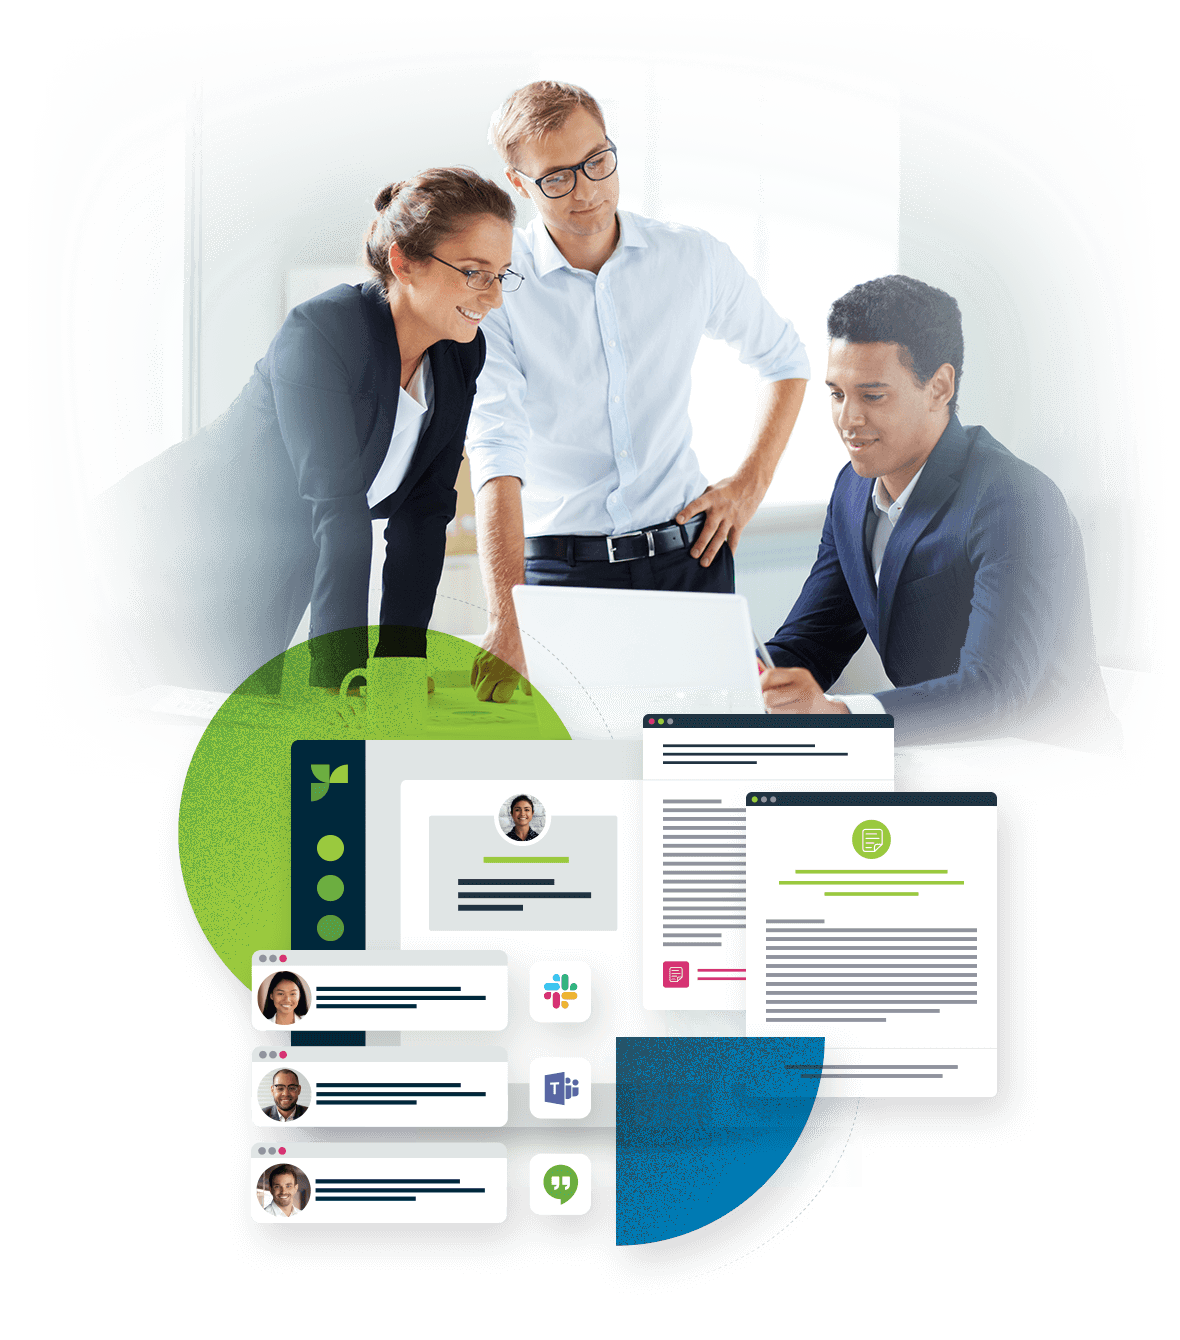  Bring your team together with RFP software